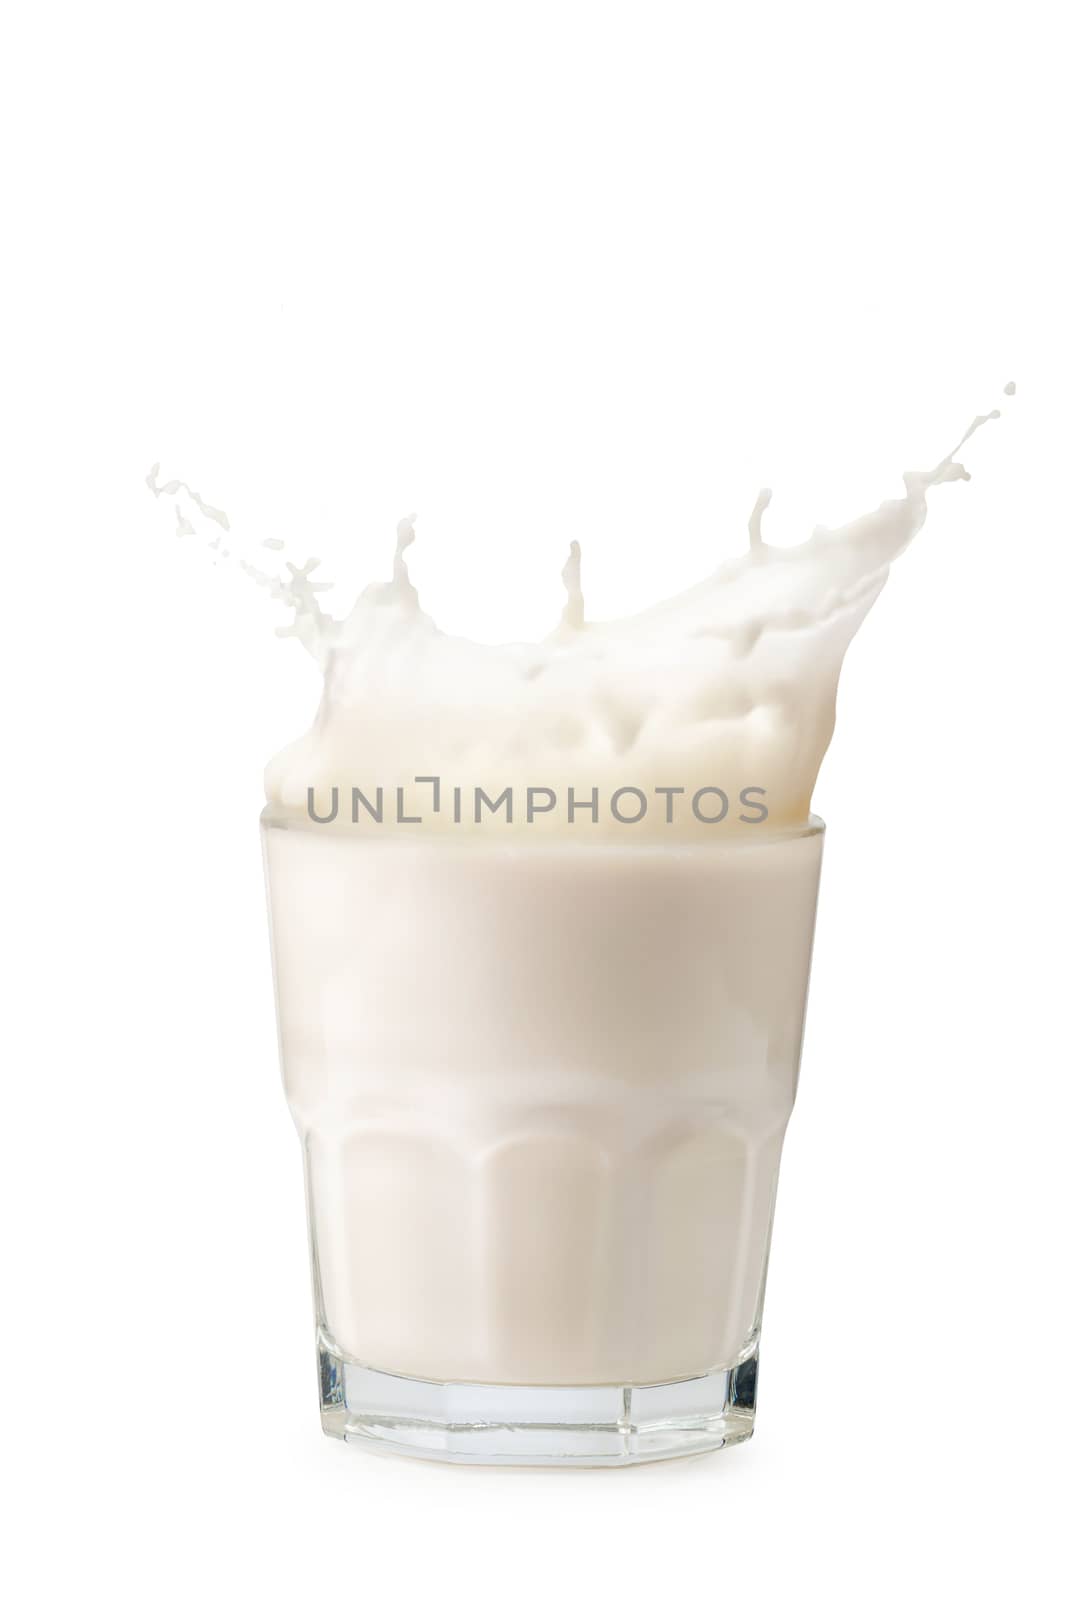 Splashes of milk from the glass isolated on white background by kaiskynet